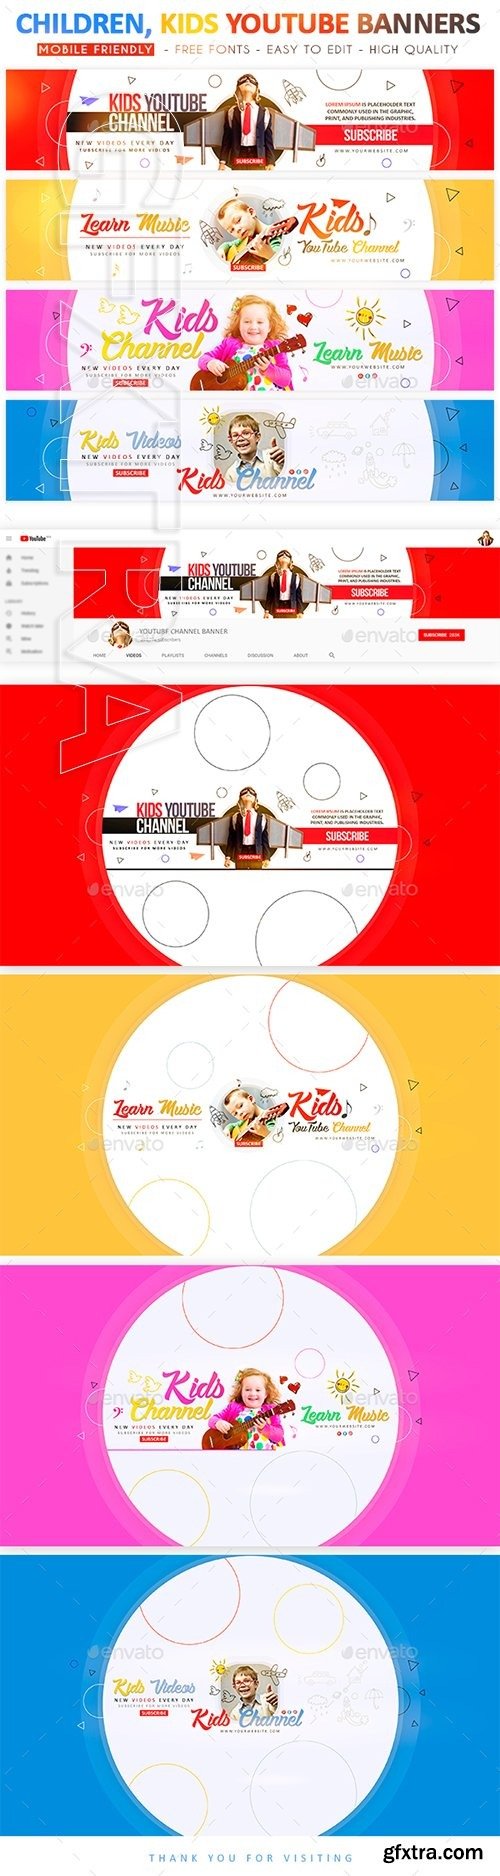 GraphicRiver - Kids YouTube Banners 22675571